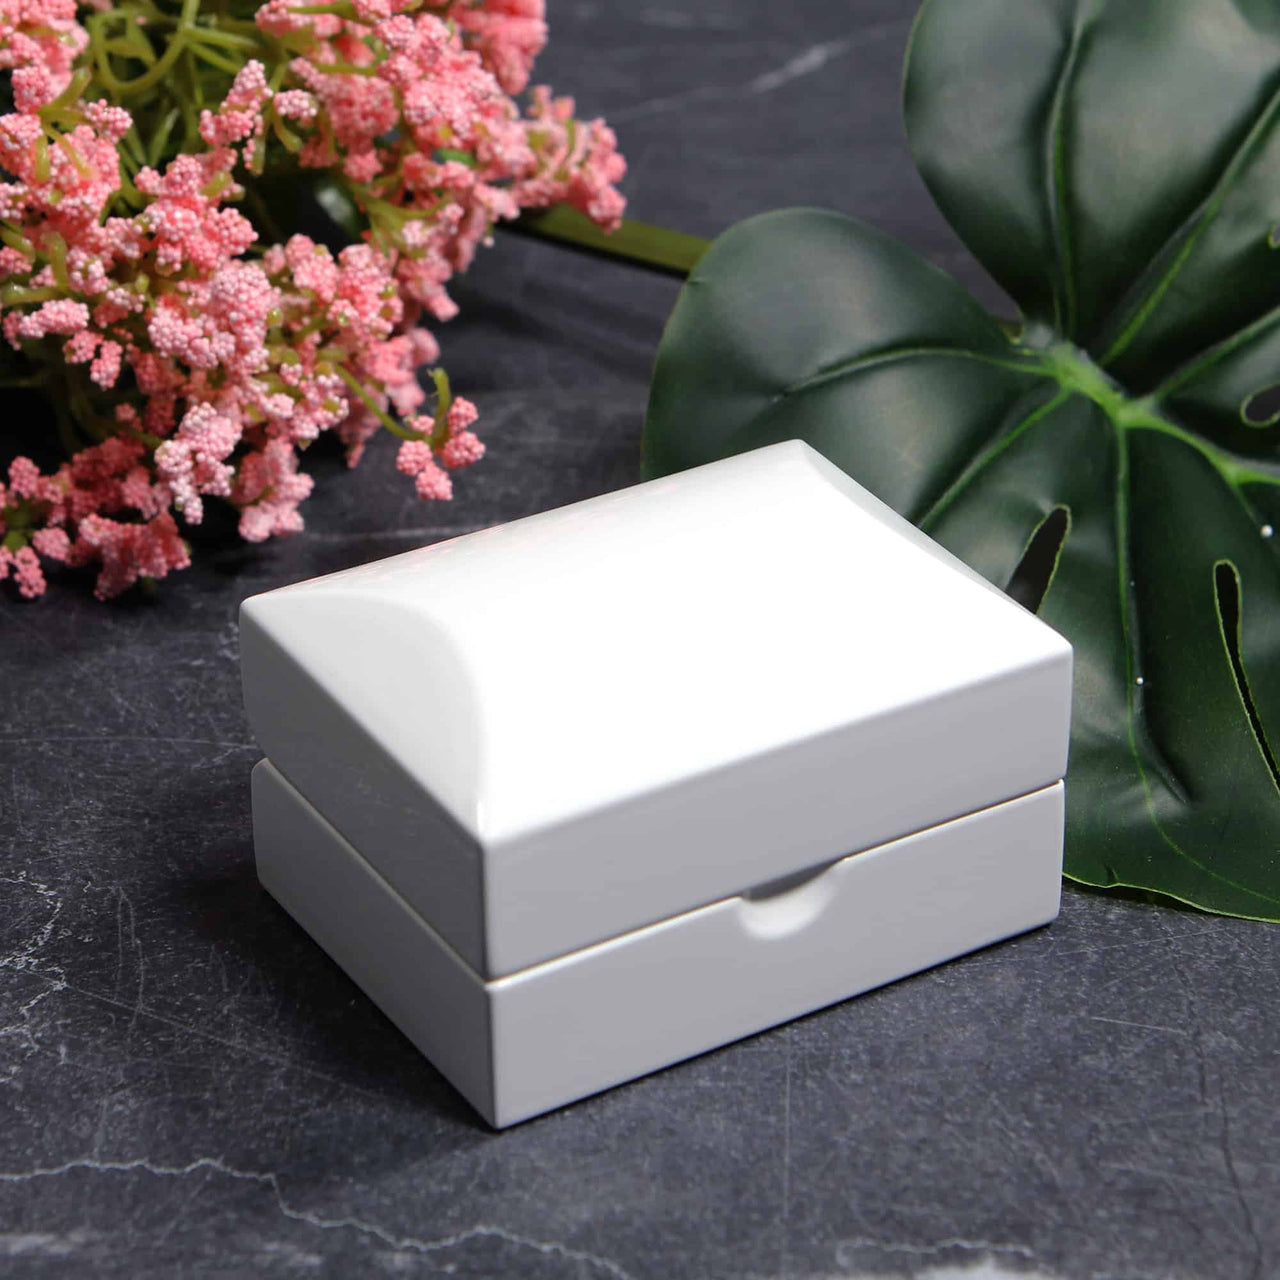 Luxury gloss white ring box for engagements, ,proposals, weddings and more. Velvet interior ensures the protection of your gems! The perfect modern ring box for your special day. This modern ring box can hold up to two rings.